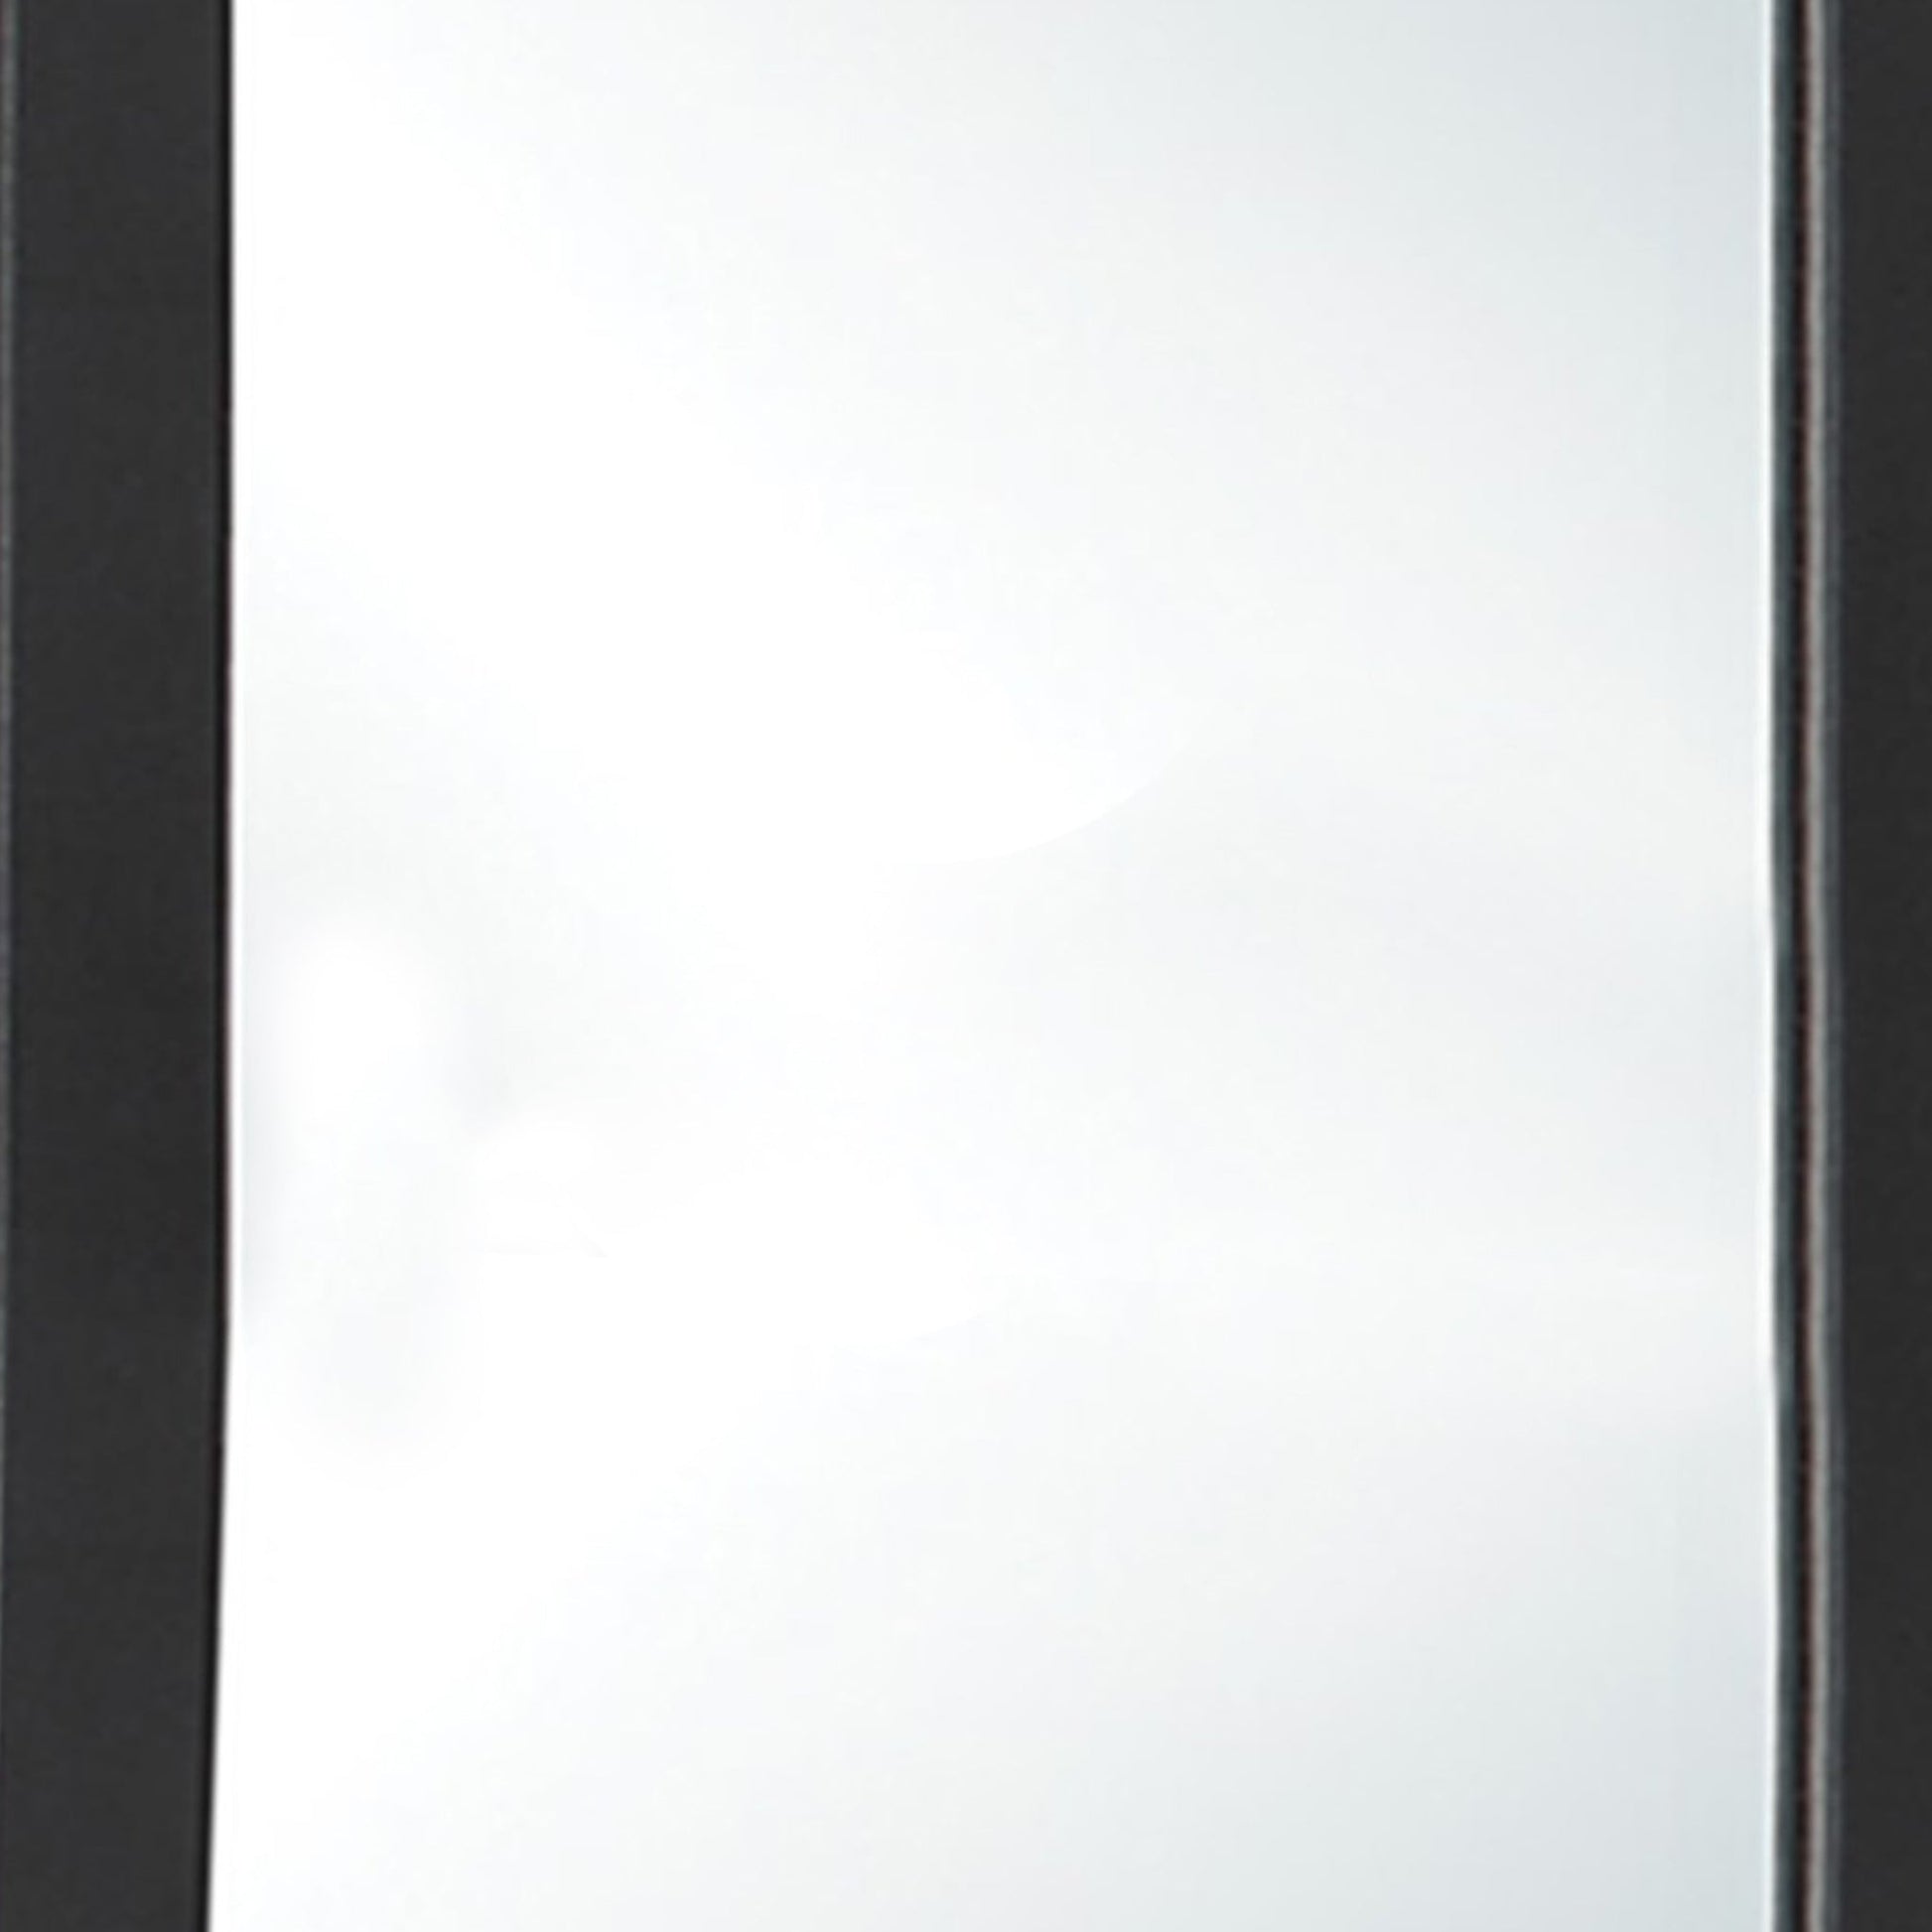 Benzara Black Rectangular Wood Encased Mirror With Faux Leather Upholstery